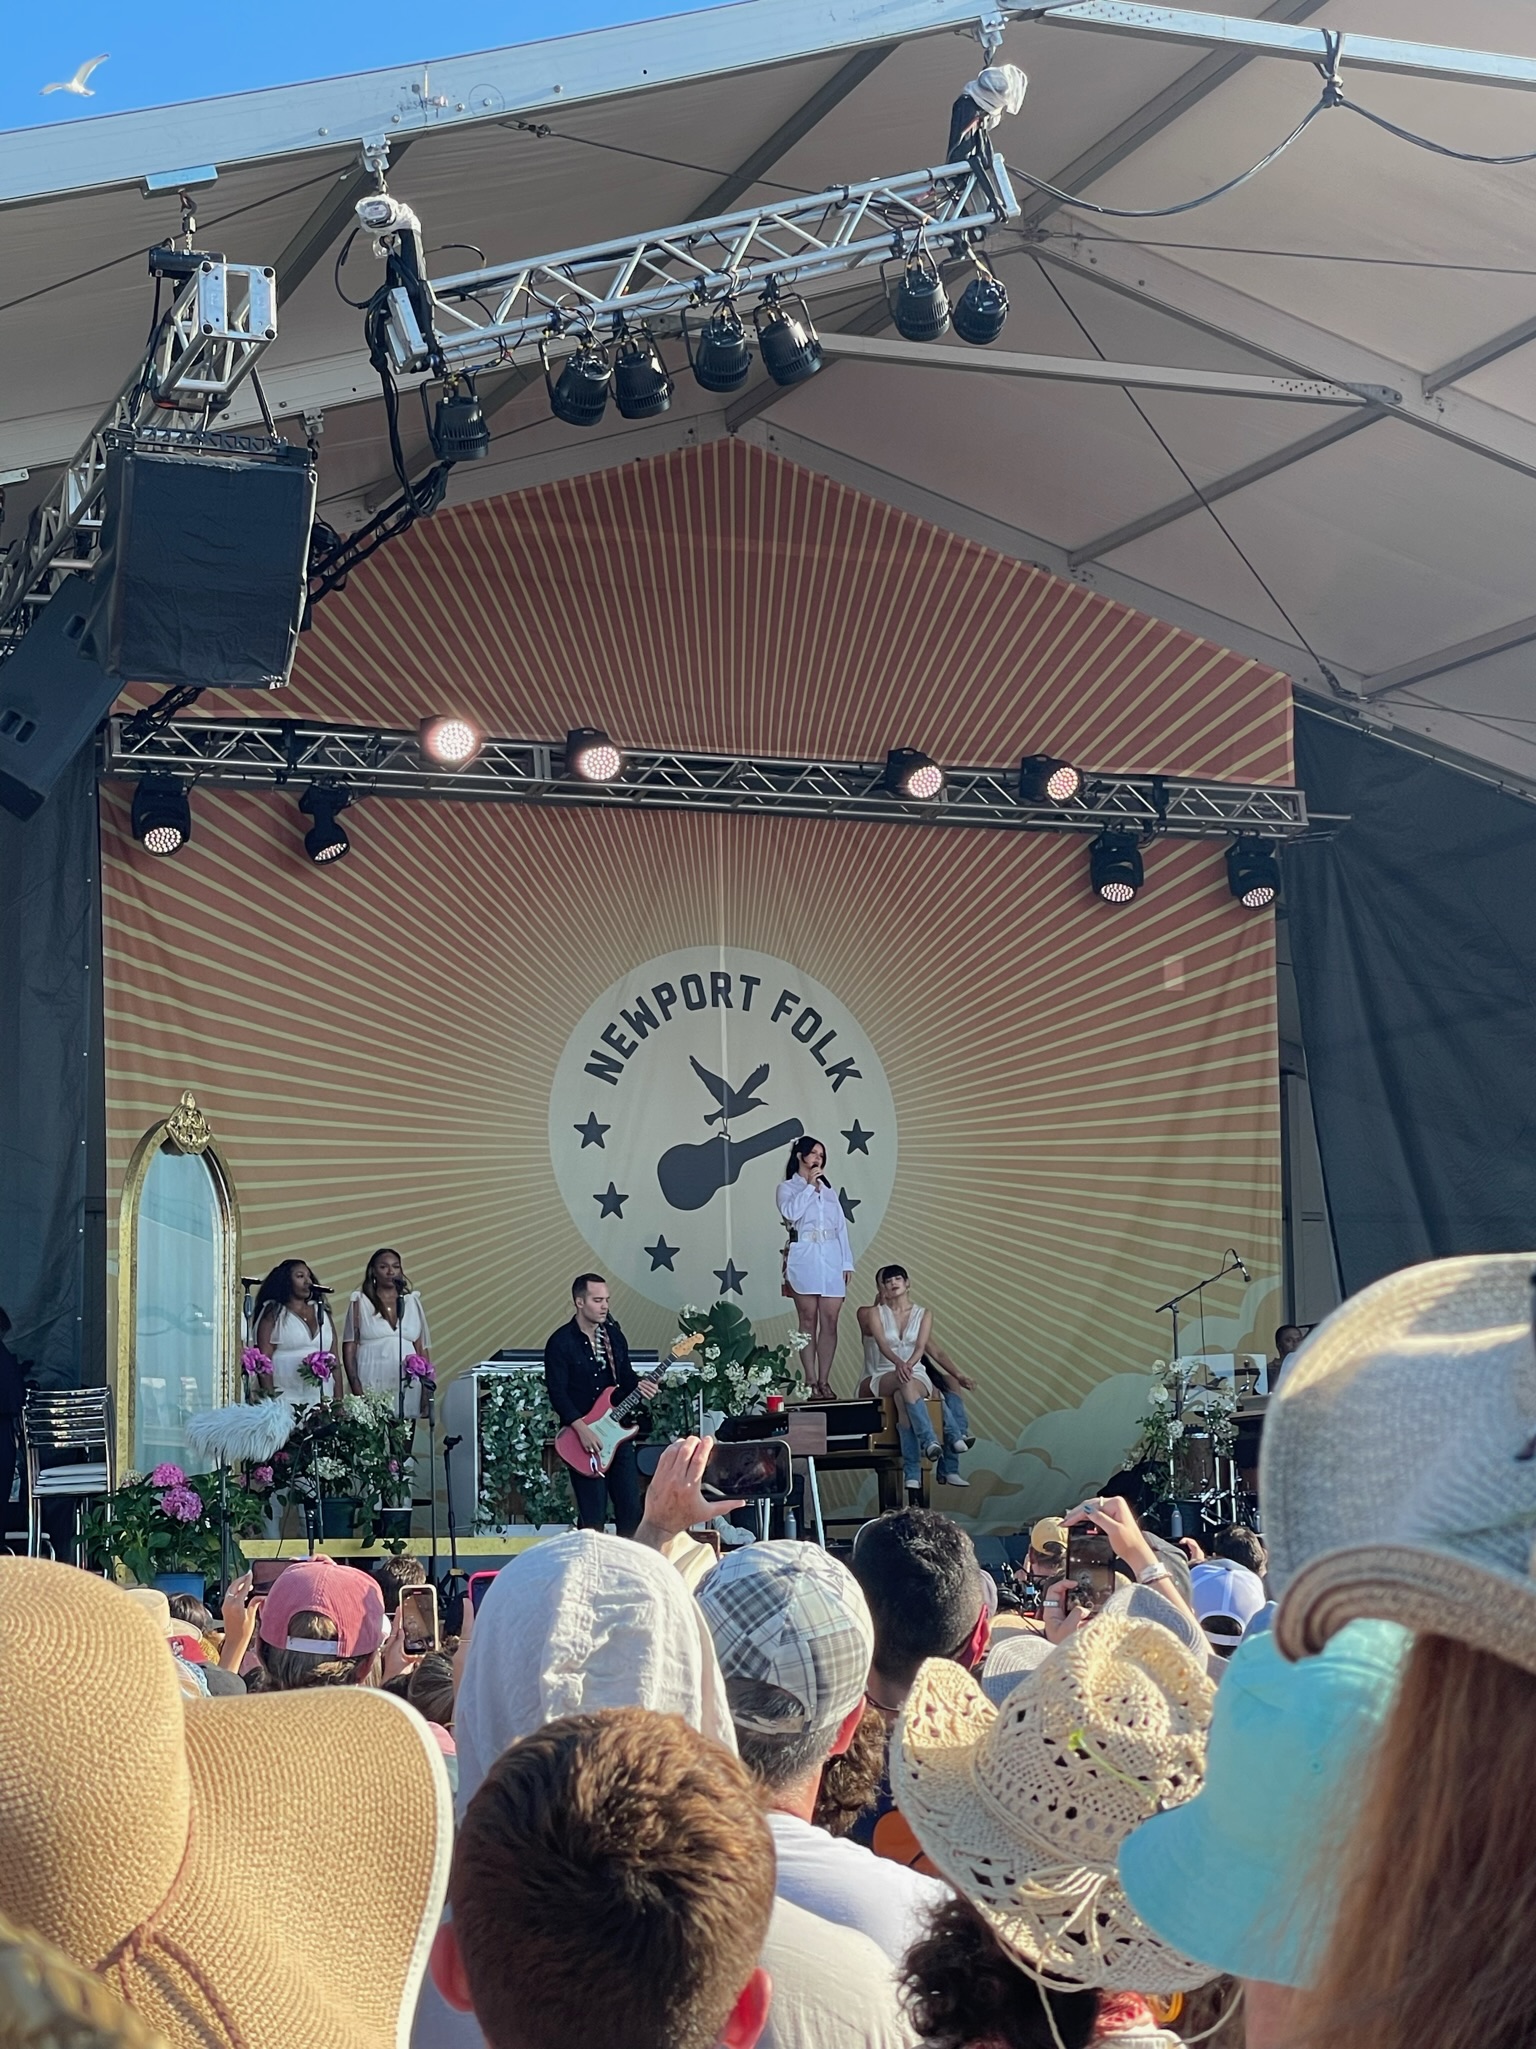 A large crowd watches a lively performance at the Newport Folk Festival. The stage backdrop features the festival's logo. Several musicians and vocalists are performing, with various instruments, plants, and decorations enhancing the stage's visual appeal.